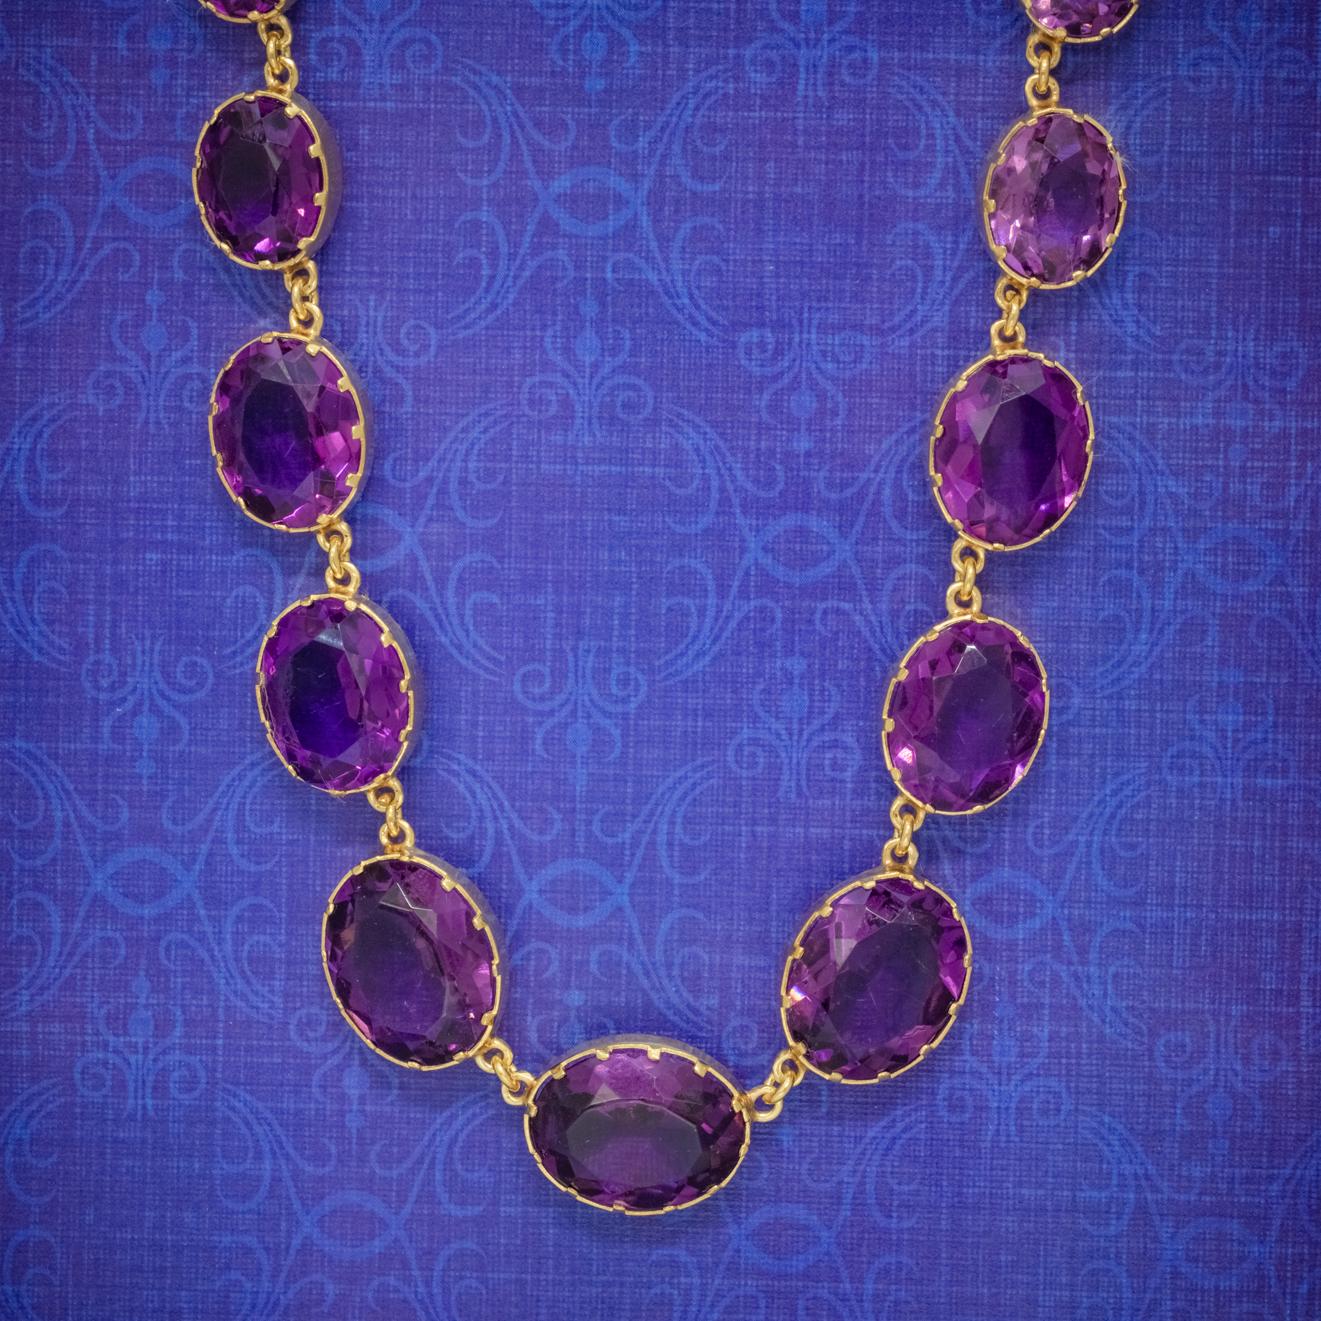 A regal Antique Victorian necklace made up of large Paste Stone links which have a striking deep violet hue and graduate in size from a 2.5ct stone at the clasp to an 8ct at the bottom. 

Paste is a transparent flint glass that simulates the fire